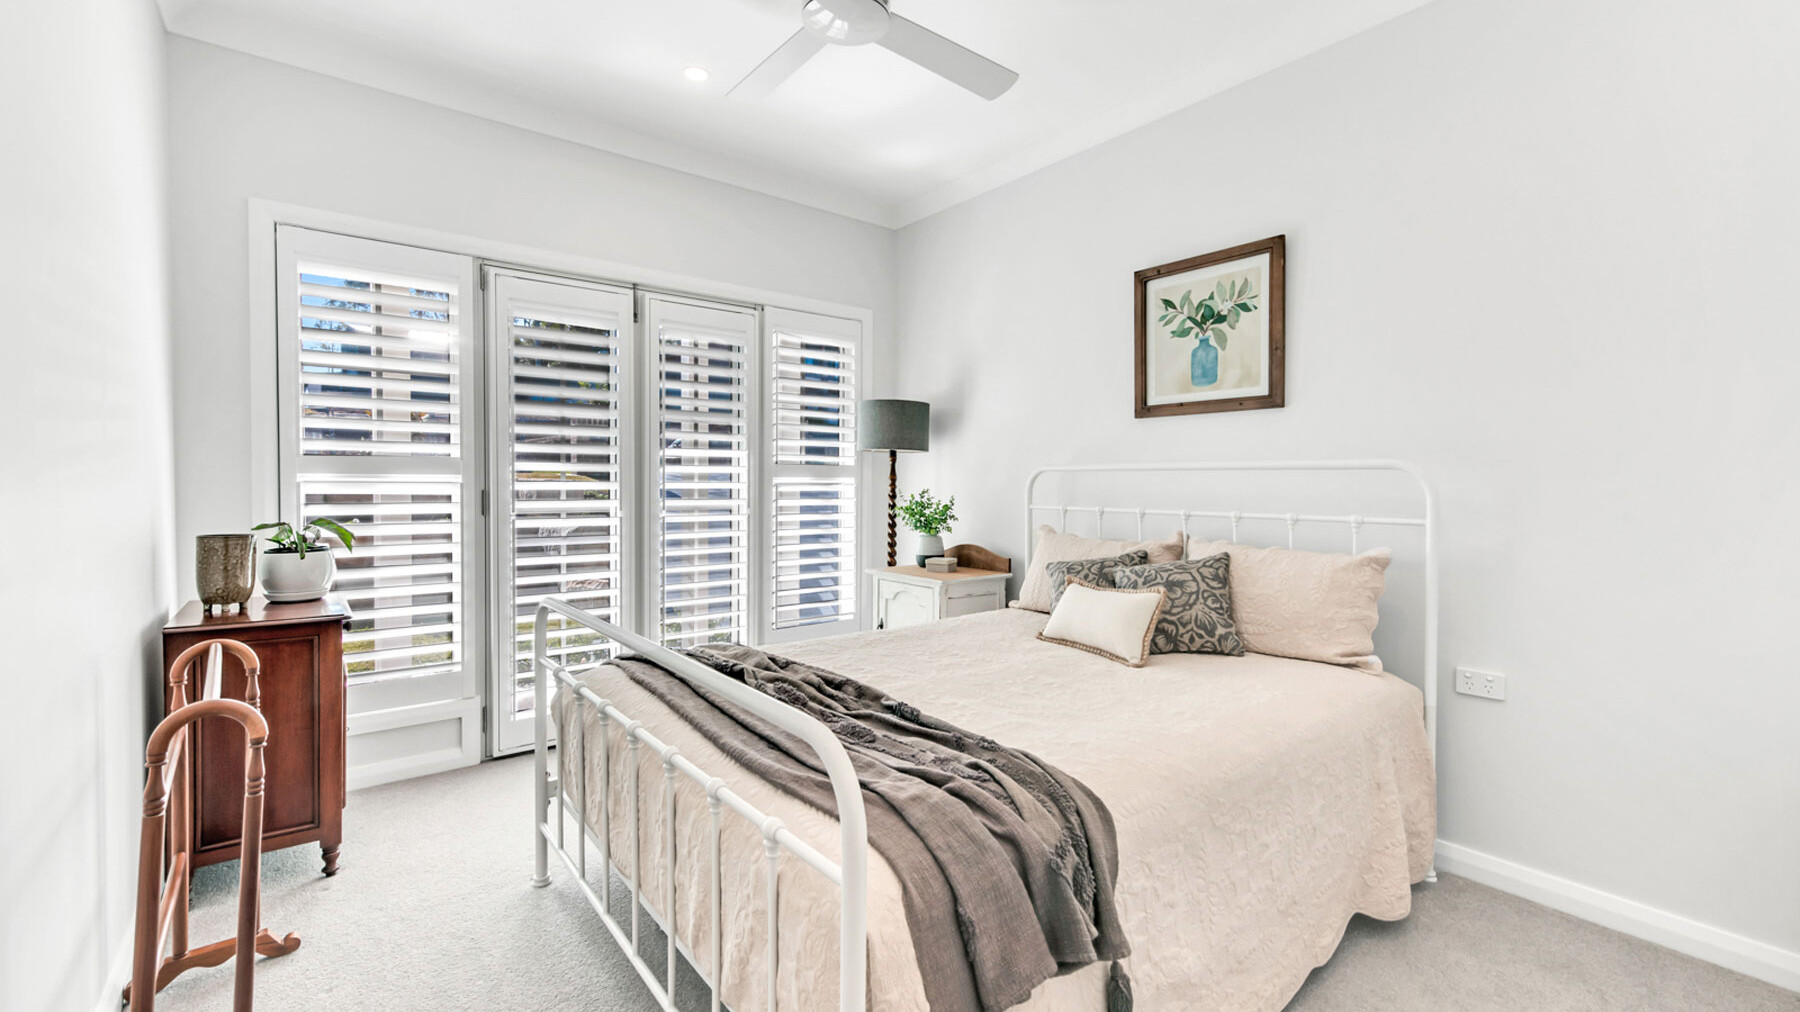 White spacious bedroom with plantation shutters